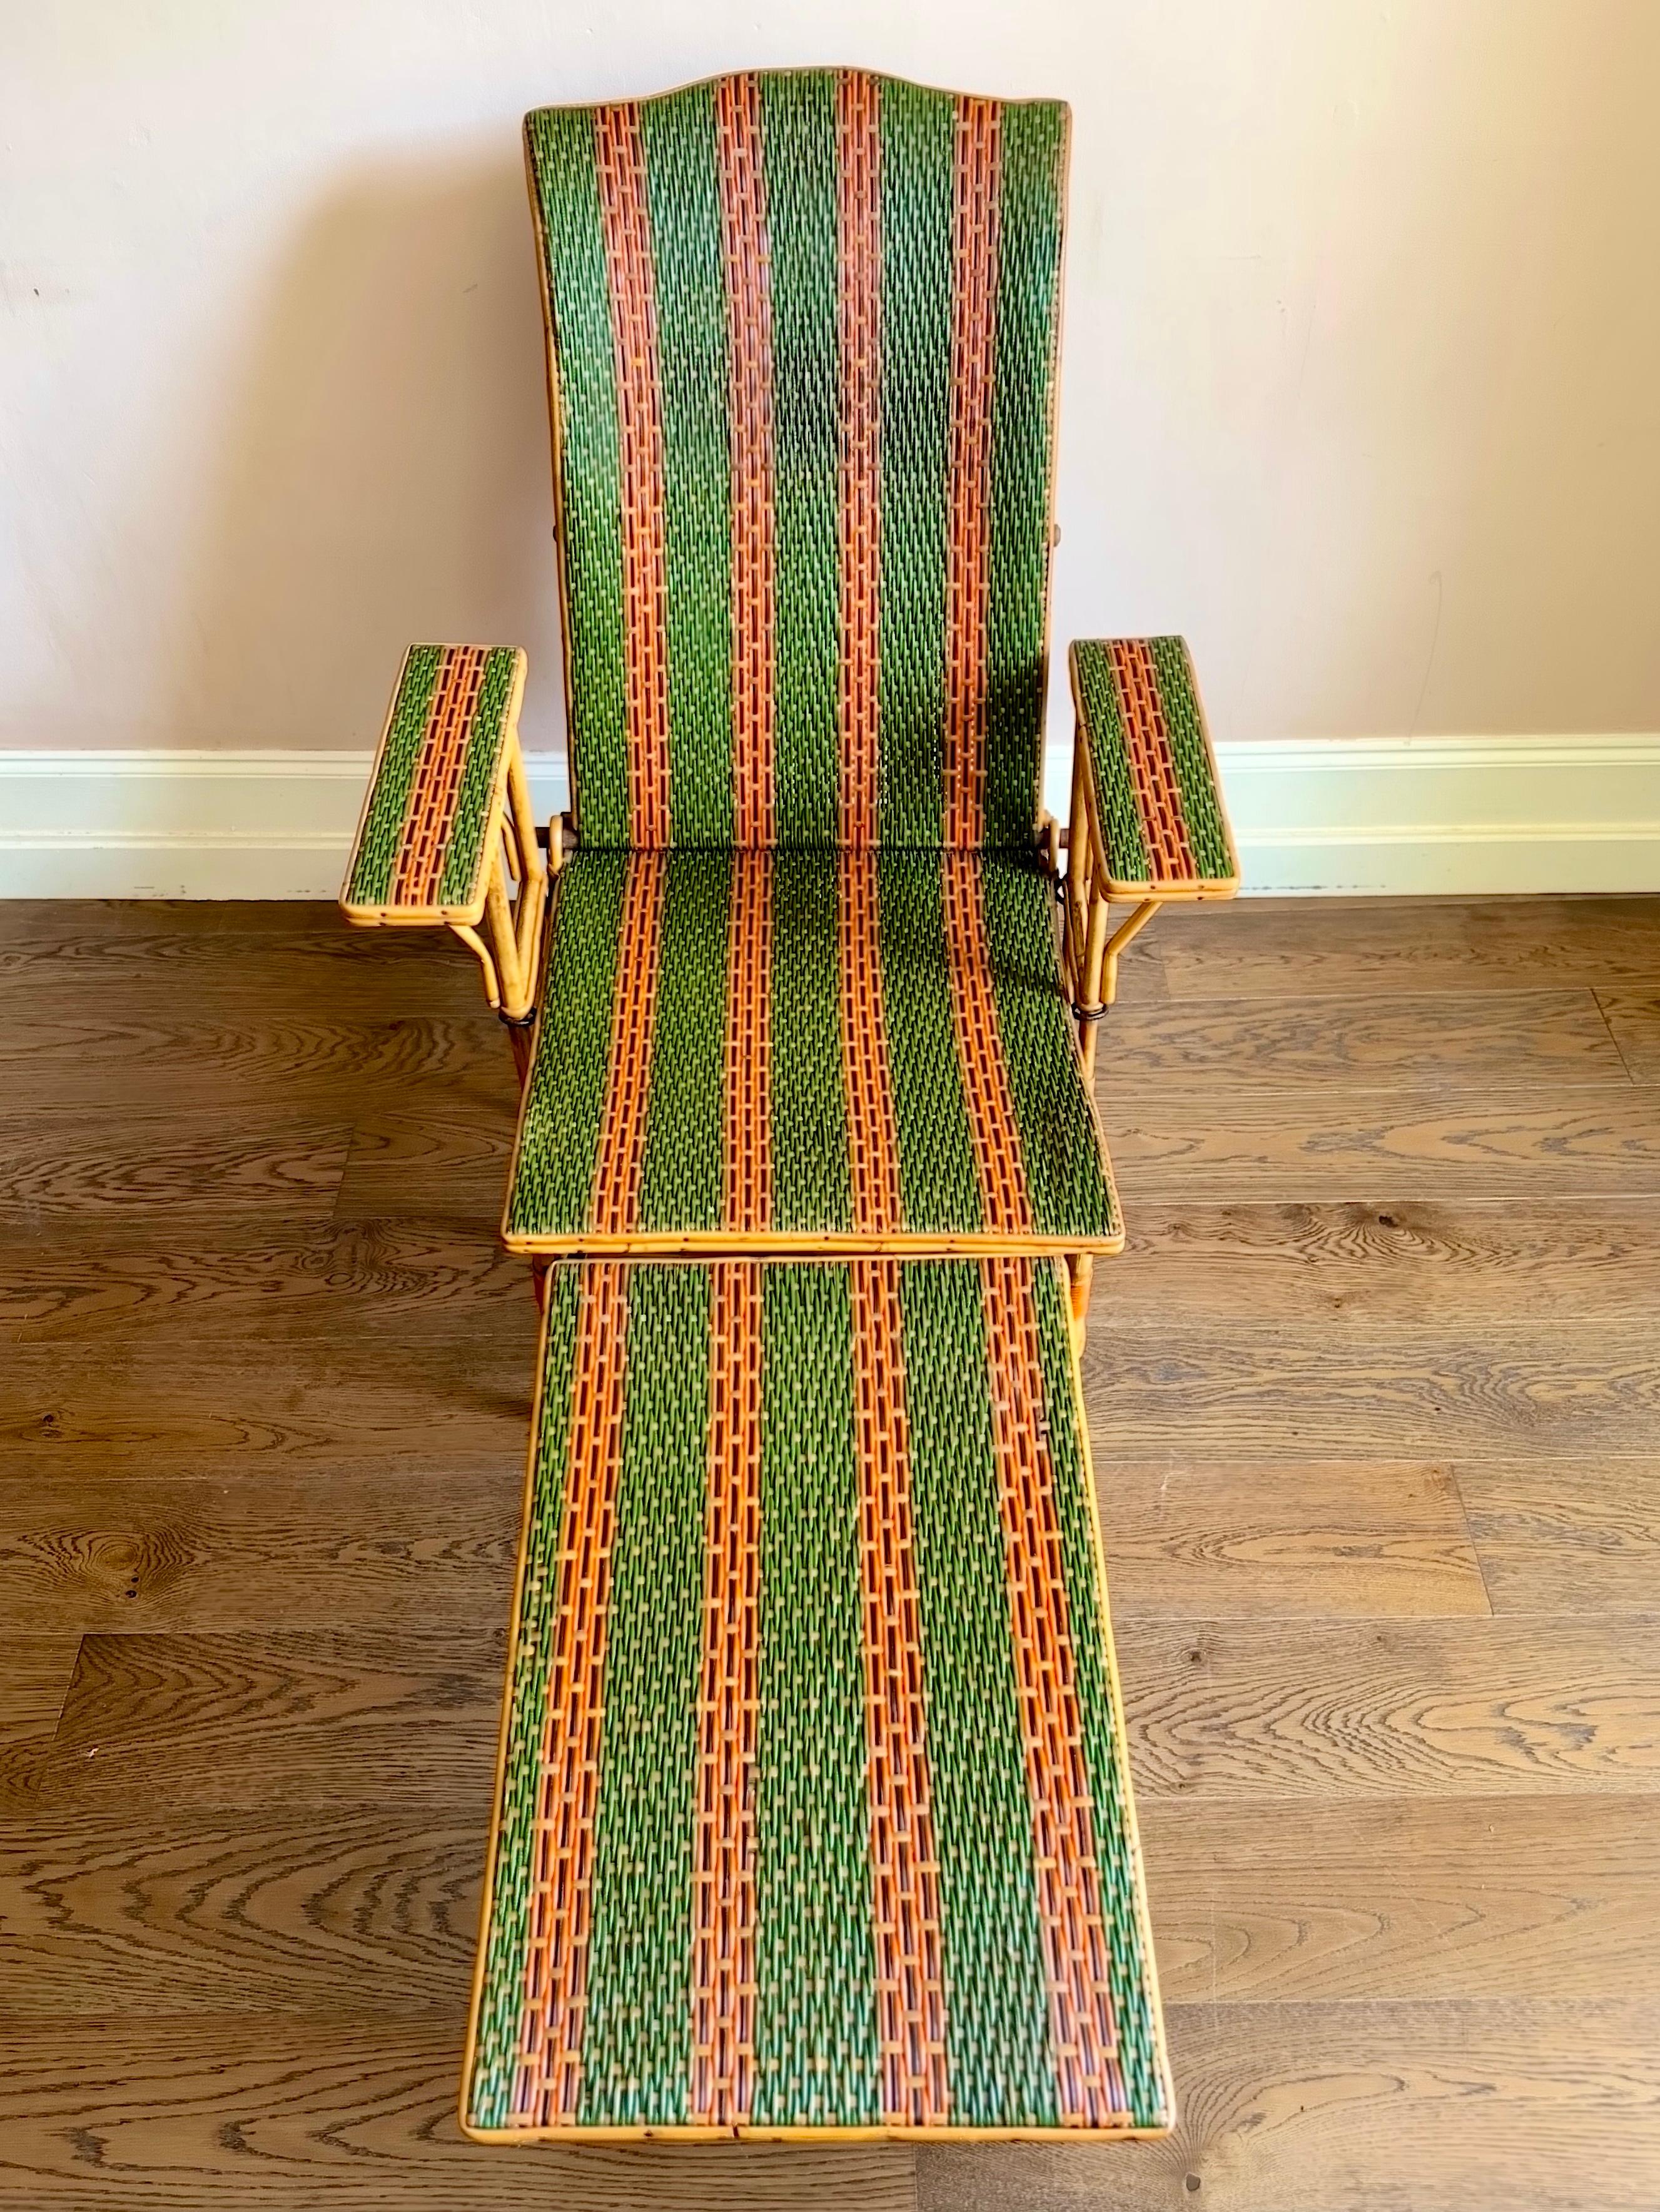 Early C20th French Bamboo & Rattan Chaise Longue Sun Lounger In Good Condition For Sale In London, GB